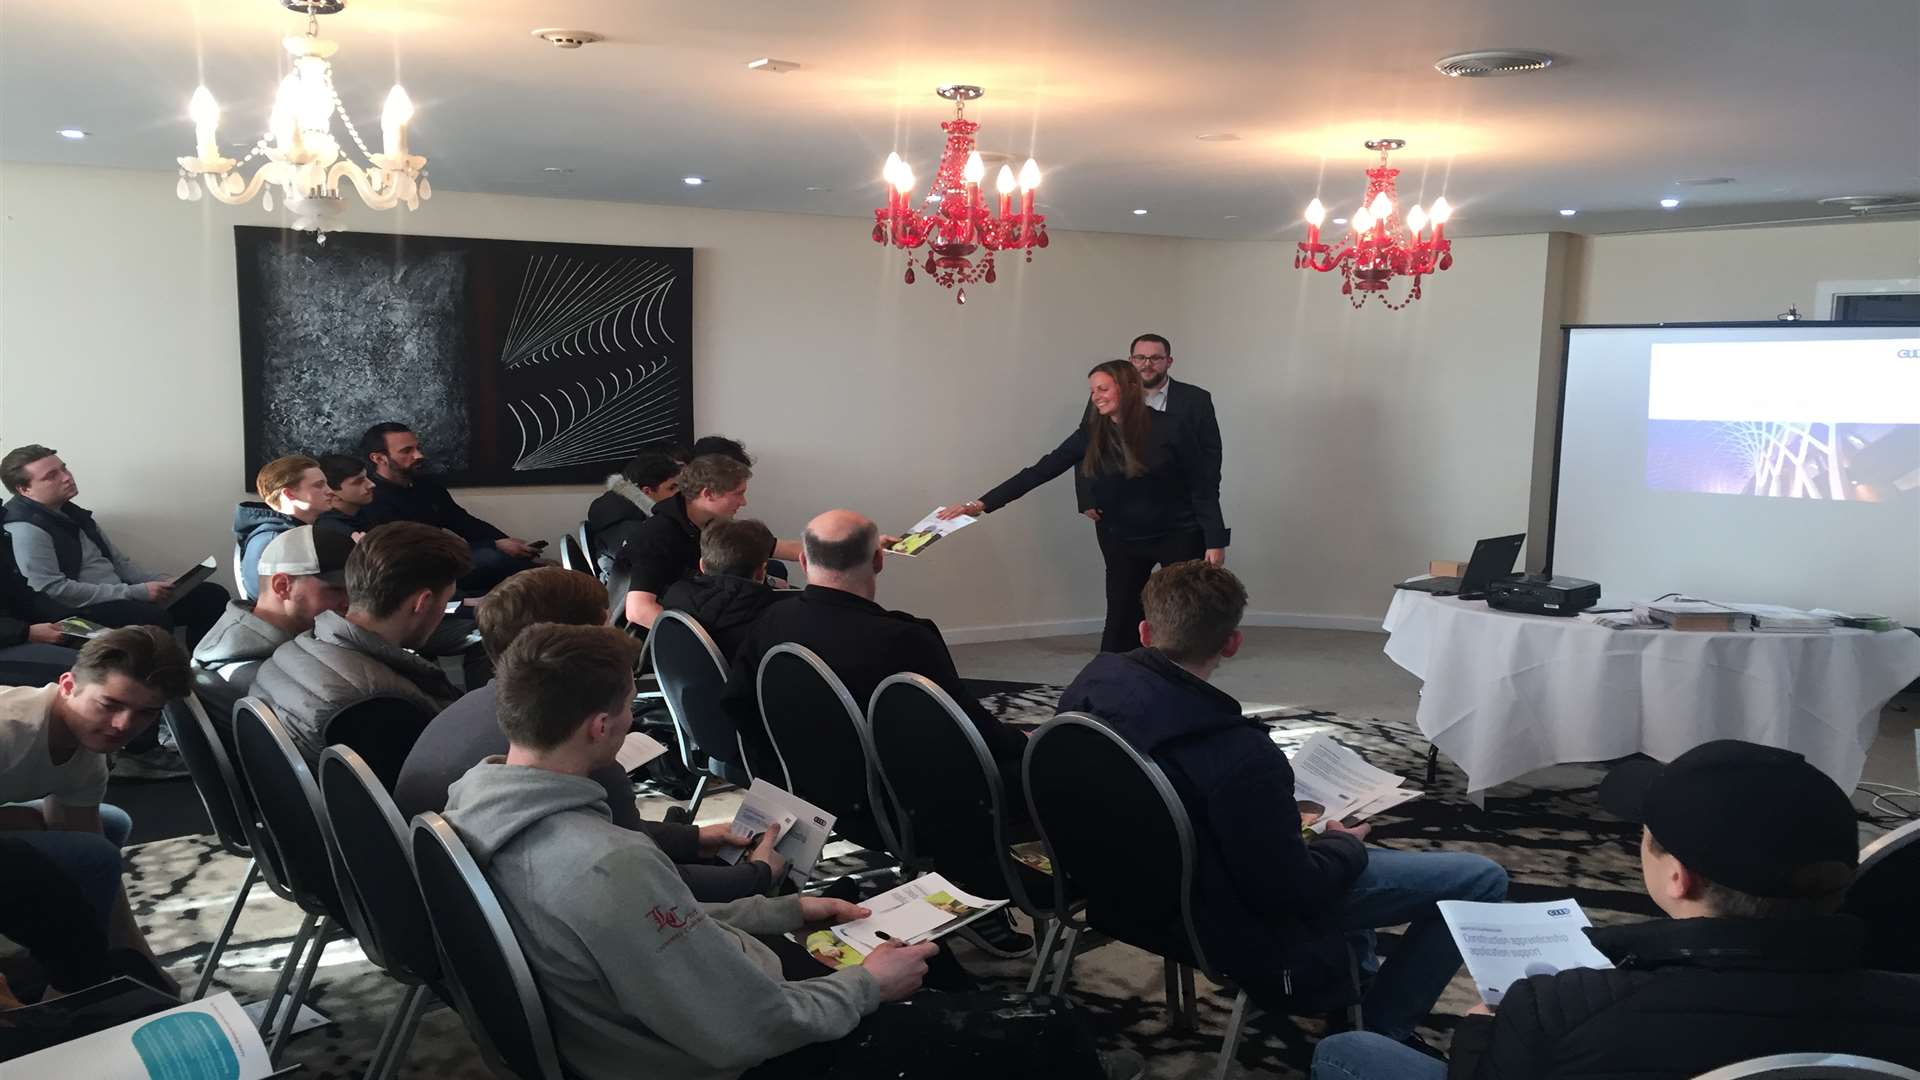 The meeting held for former Carillion apprentices by CITB at The Coniston Hotel, Sittingbourne